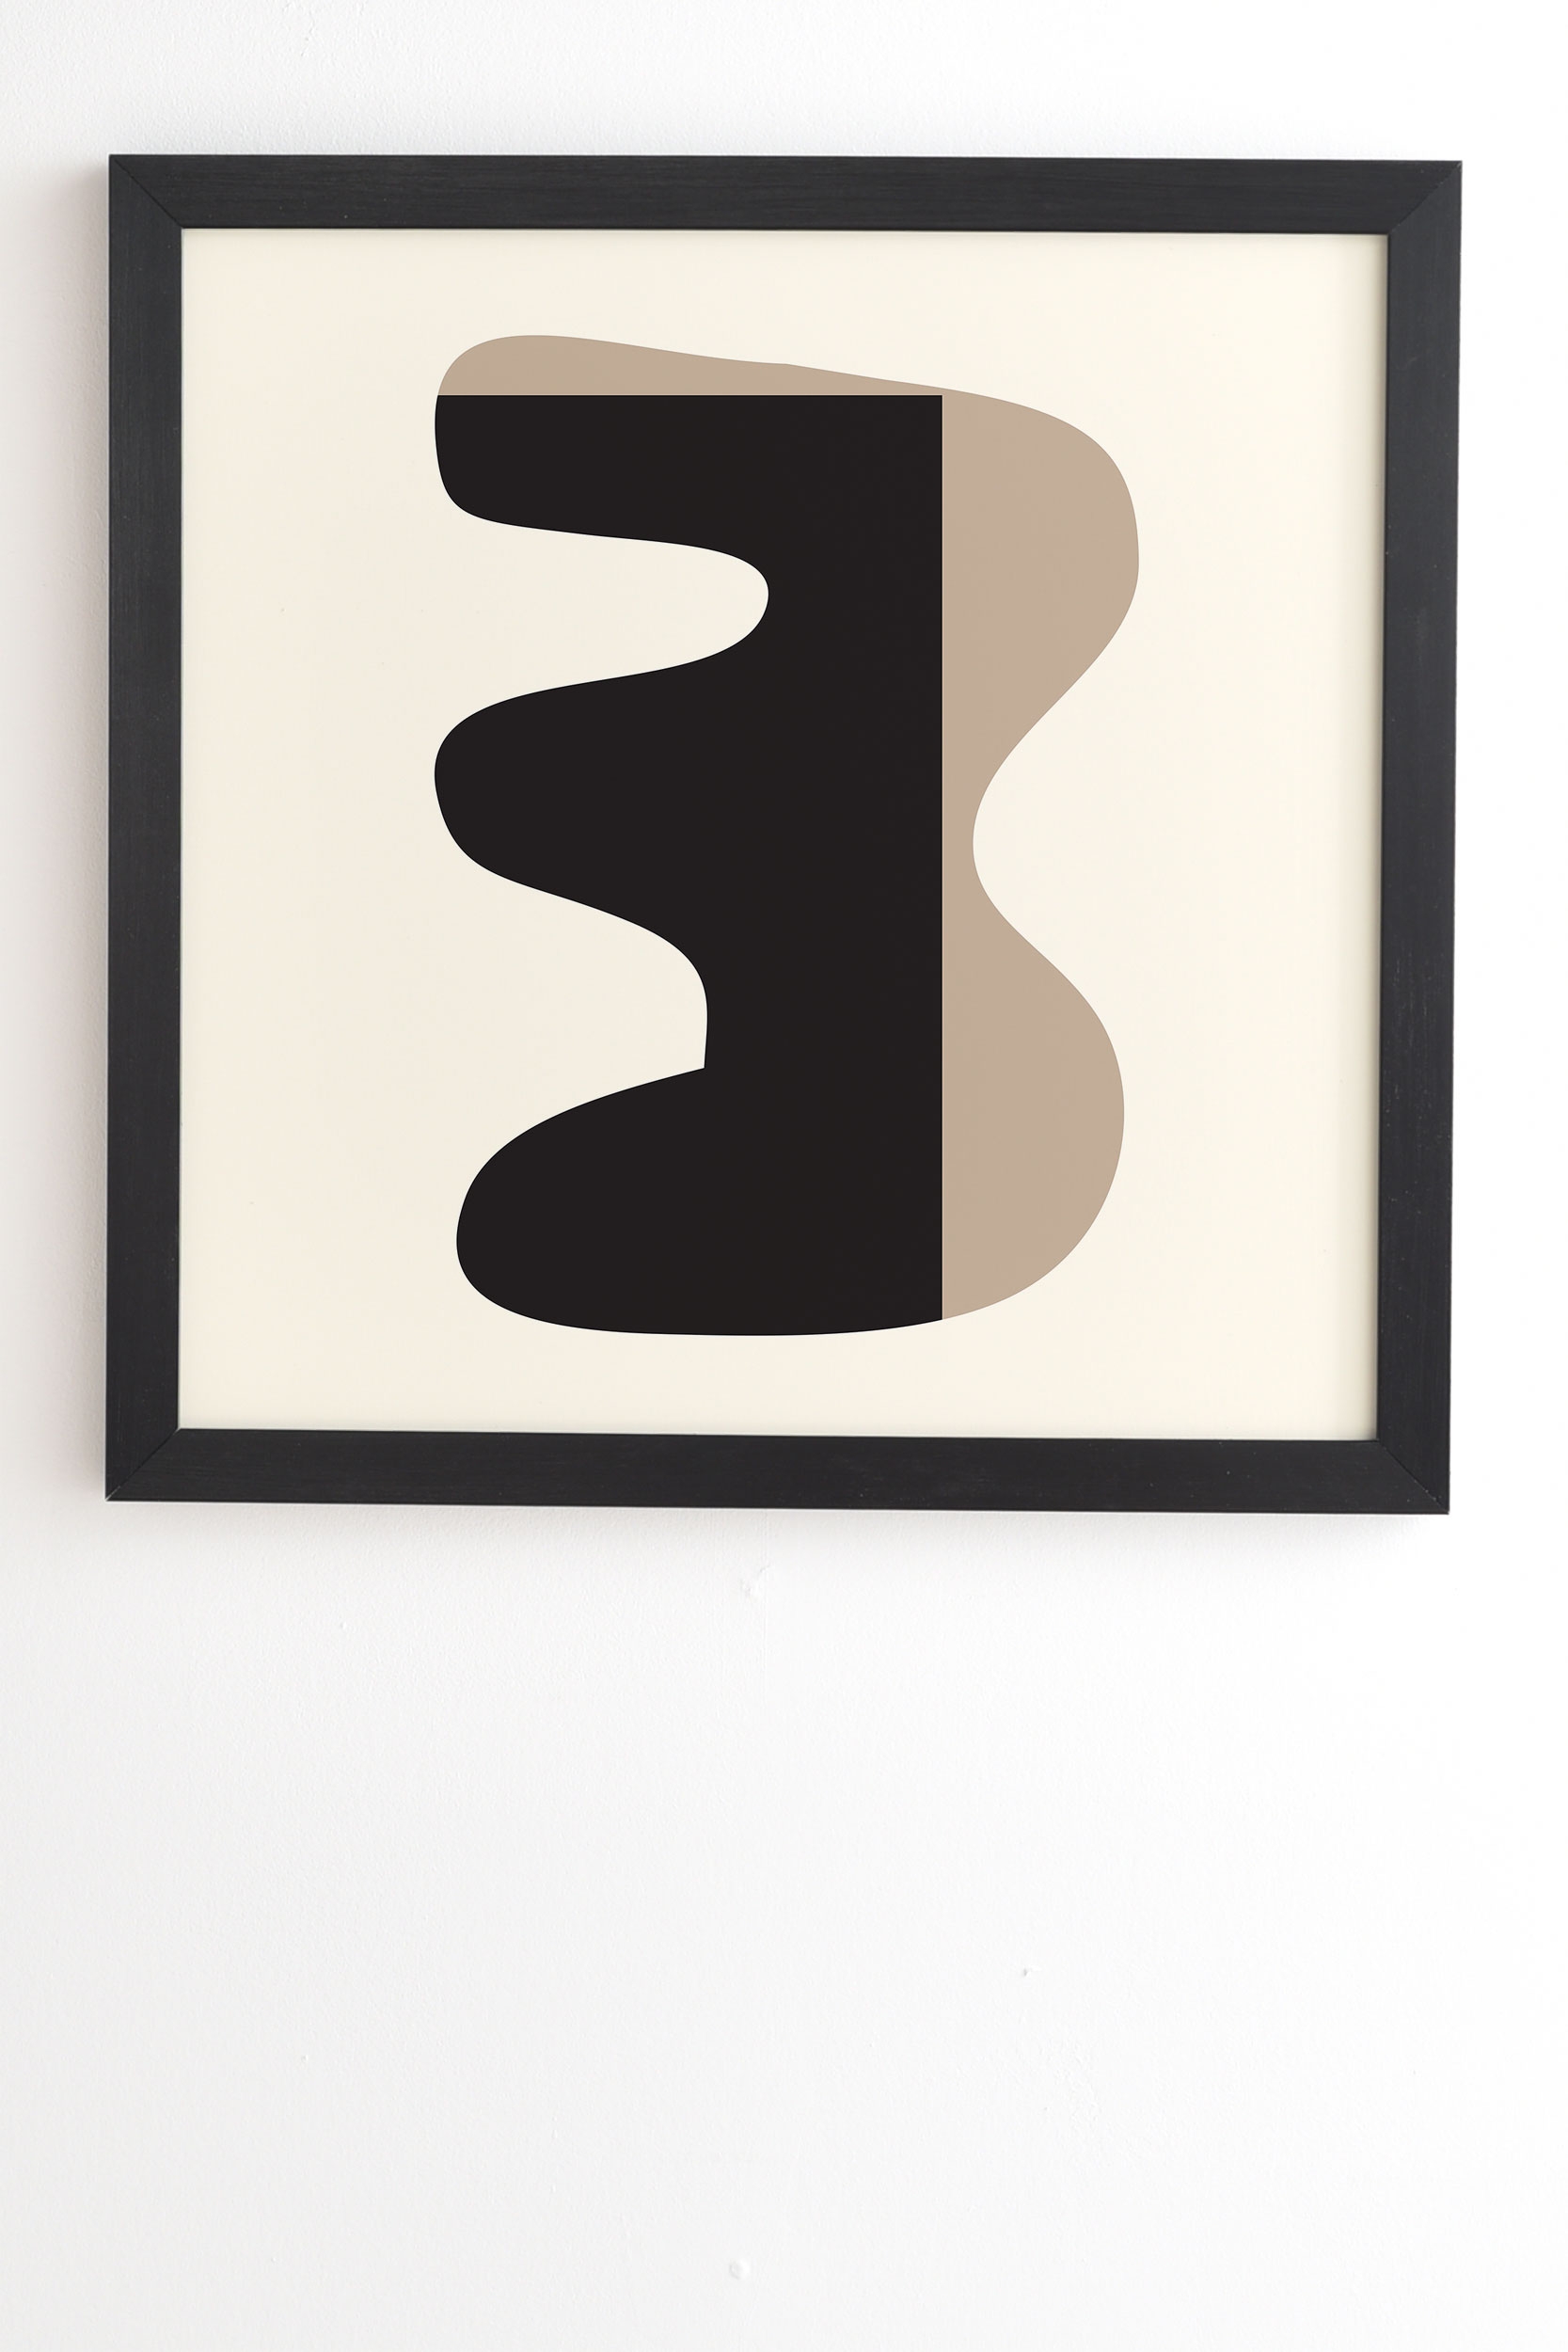 Intersections 01 by mpgmb - Framed Wall Art Basic Black 19" x 22.4" - Image 1